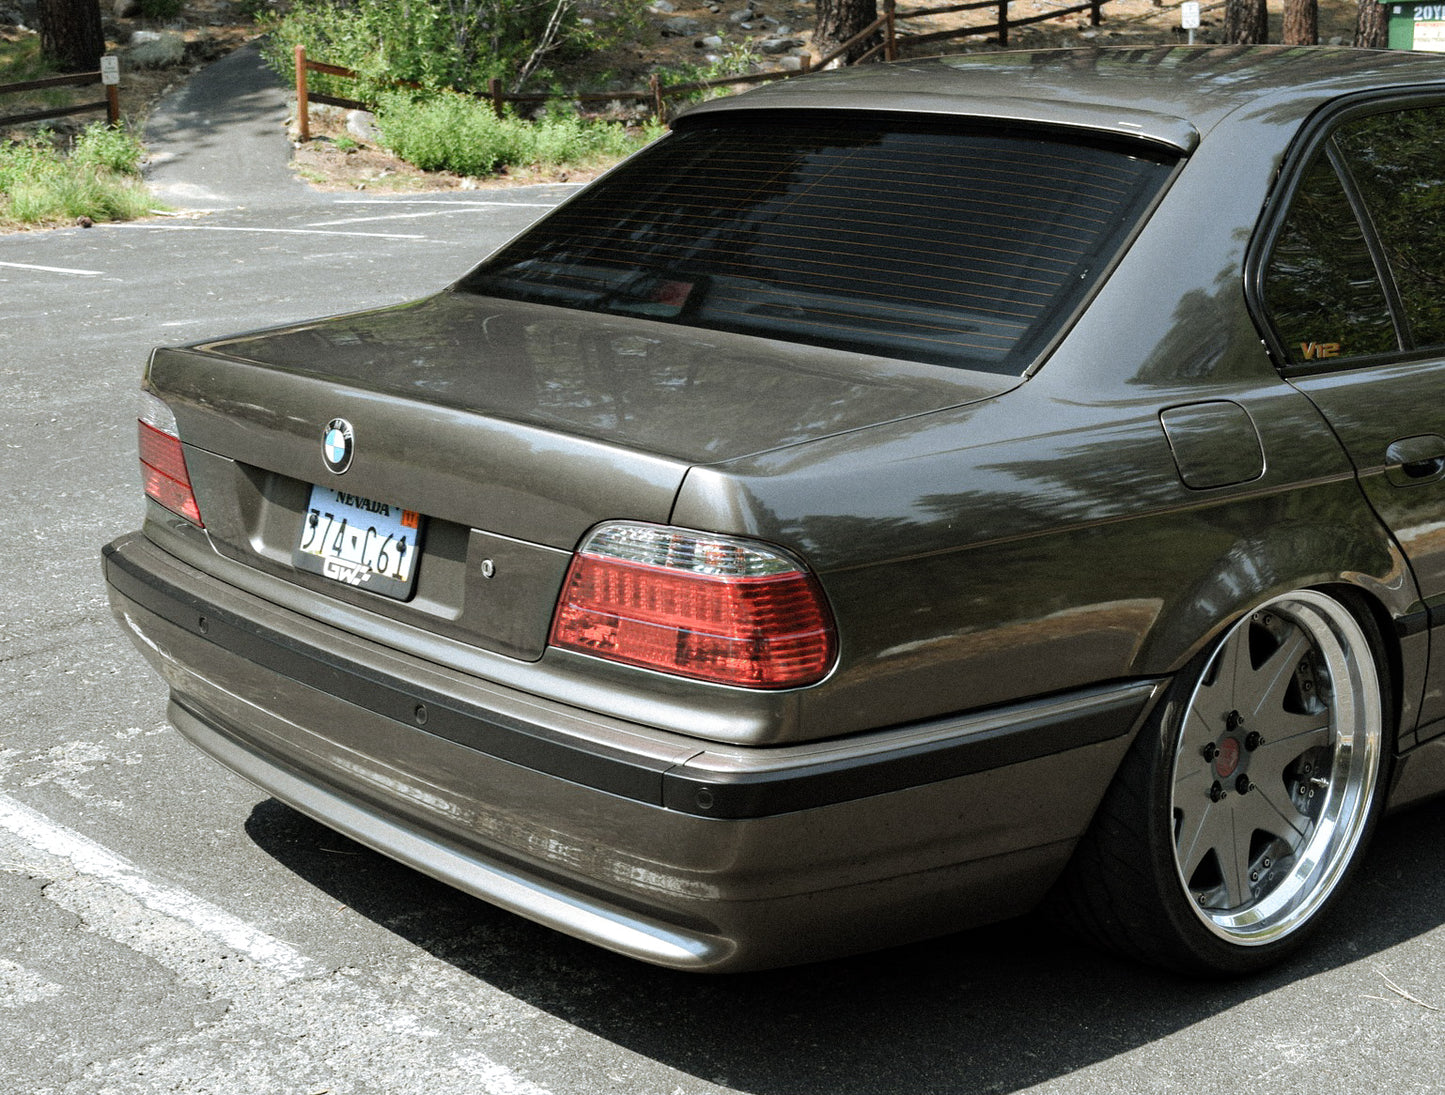 BMW E38 rear window roof spoiler, pre painted